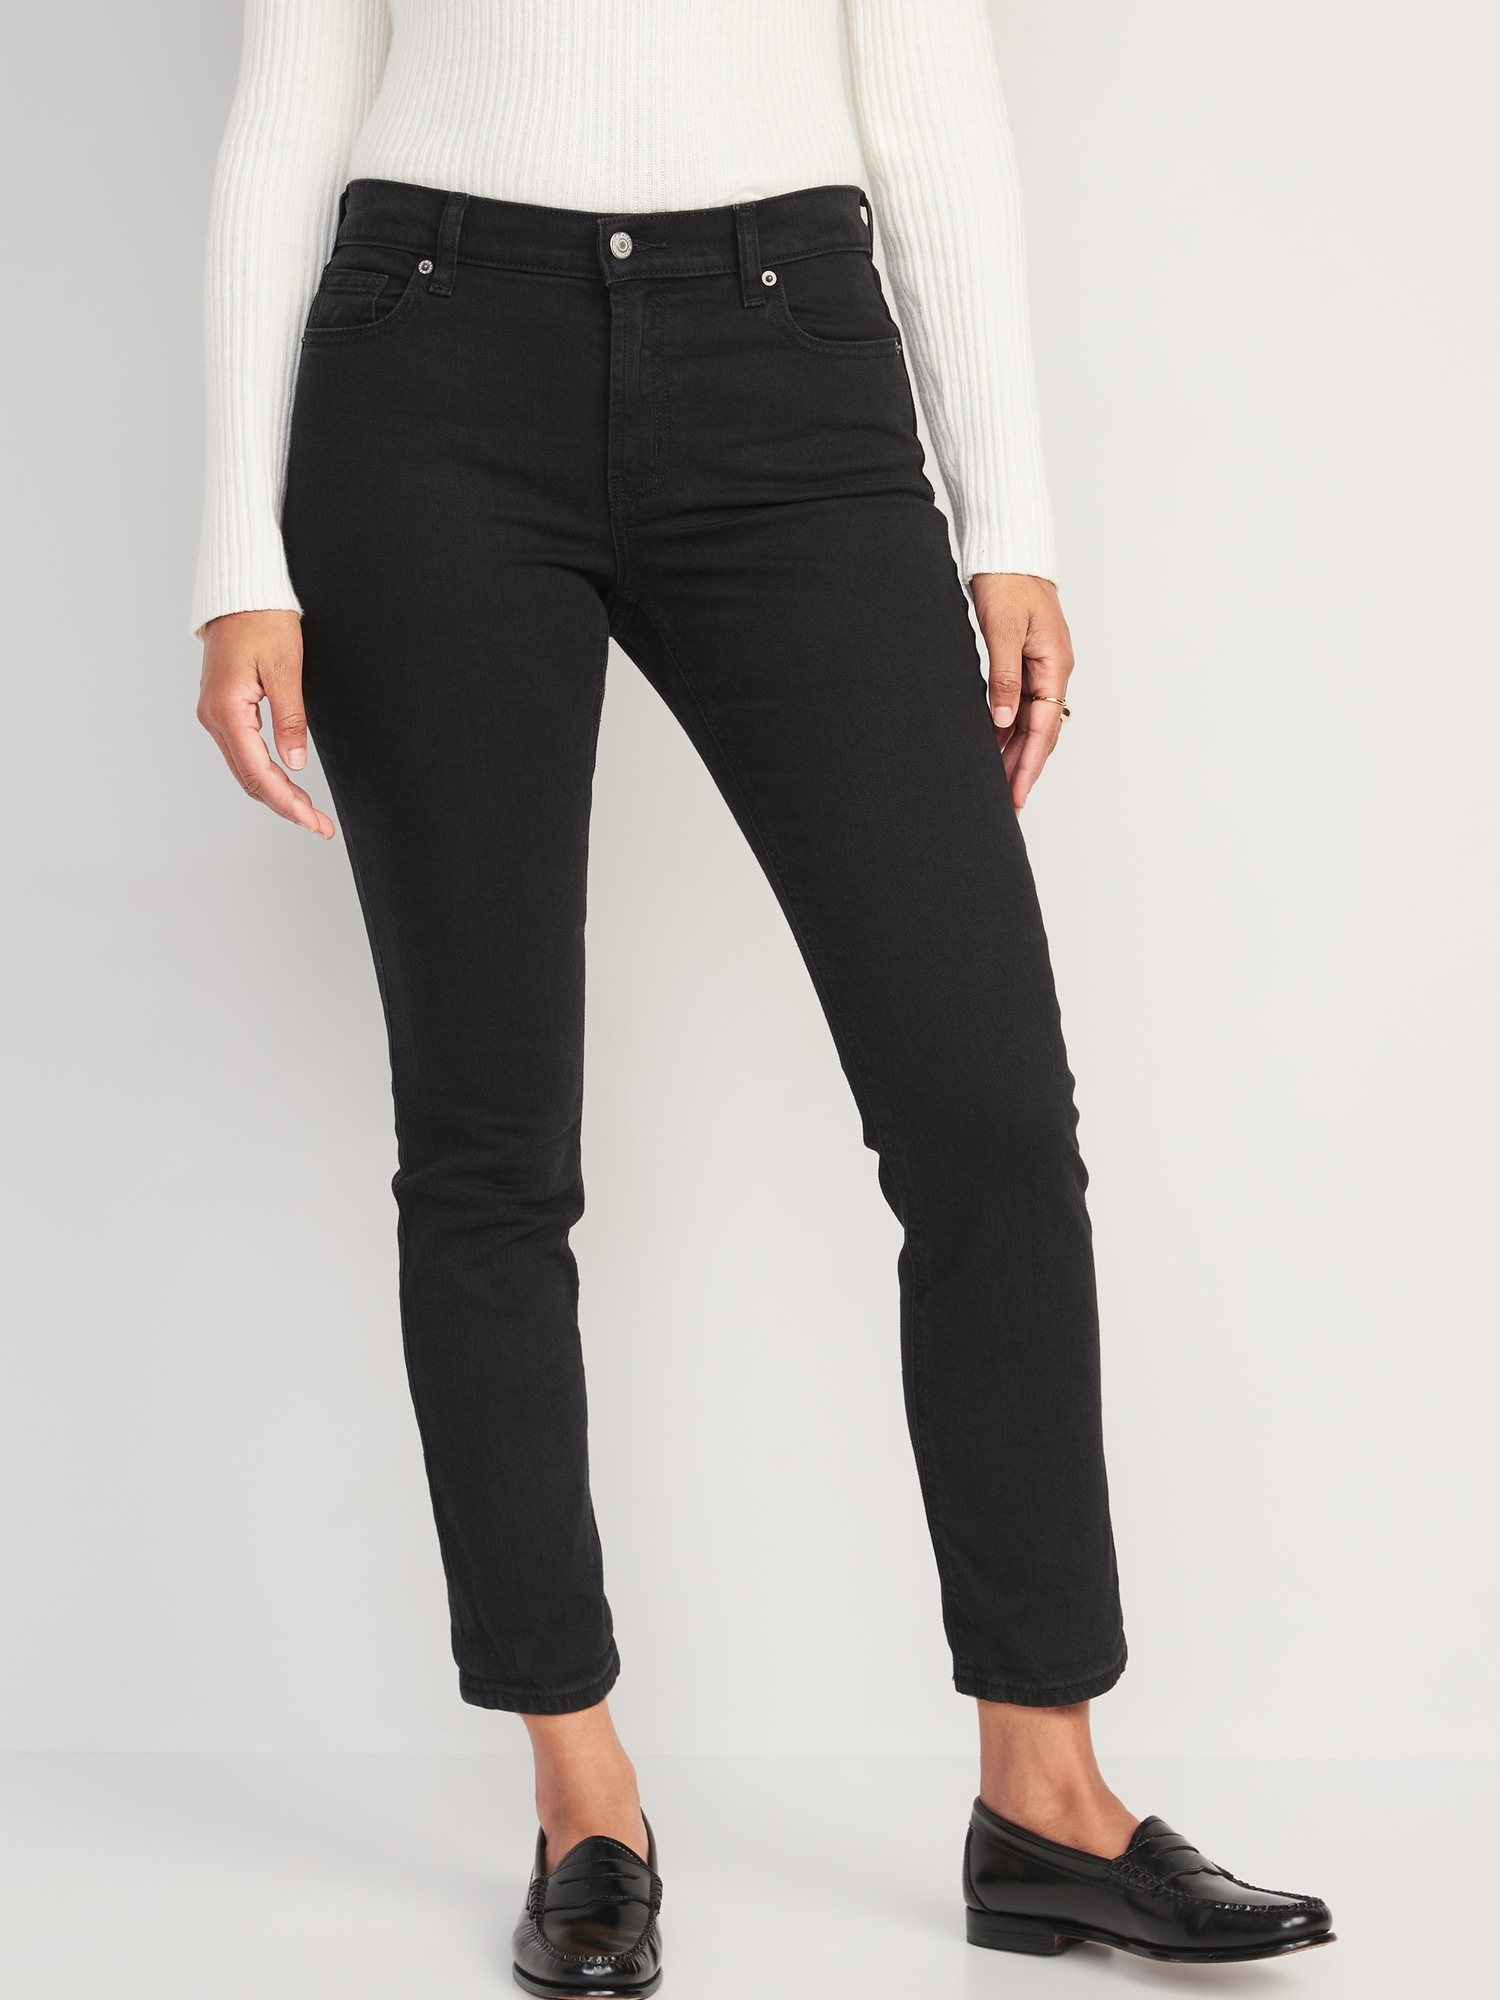 Low-Rise Black-Wash Boyfriend Straight Jeans for Women | Old Navy